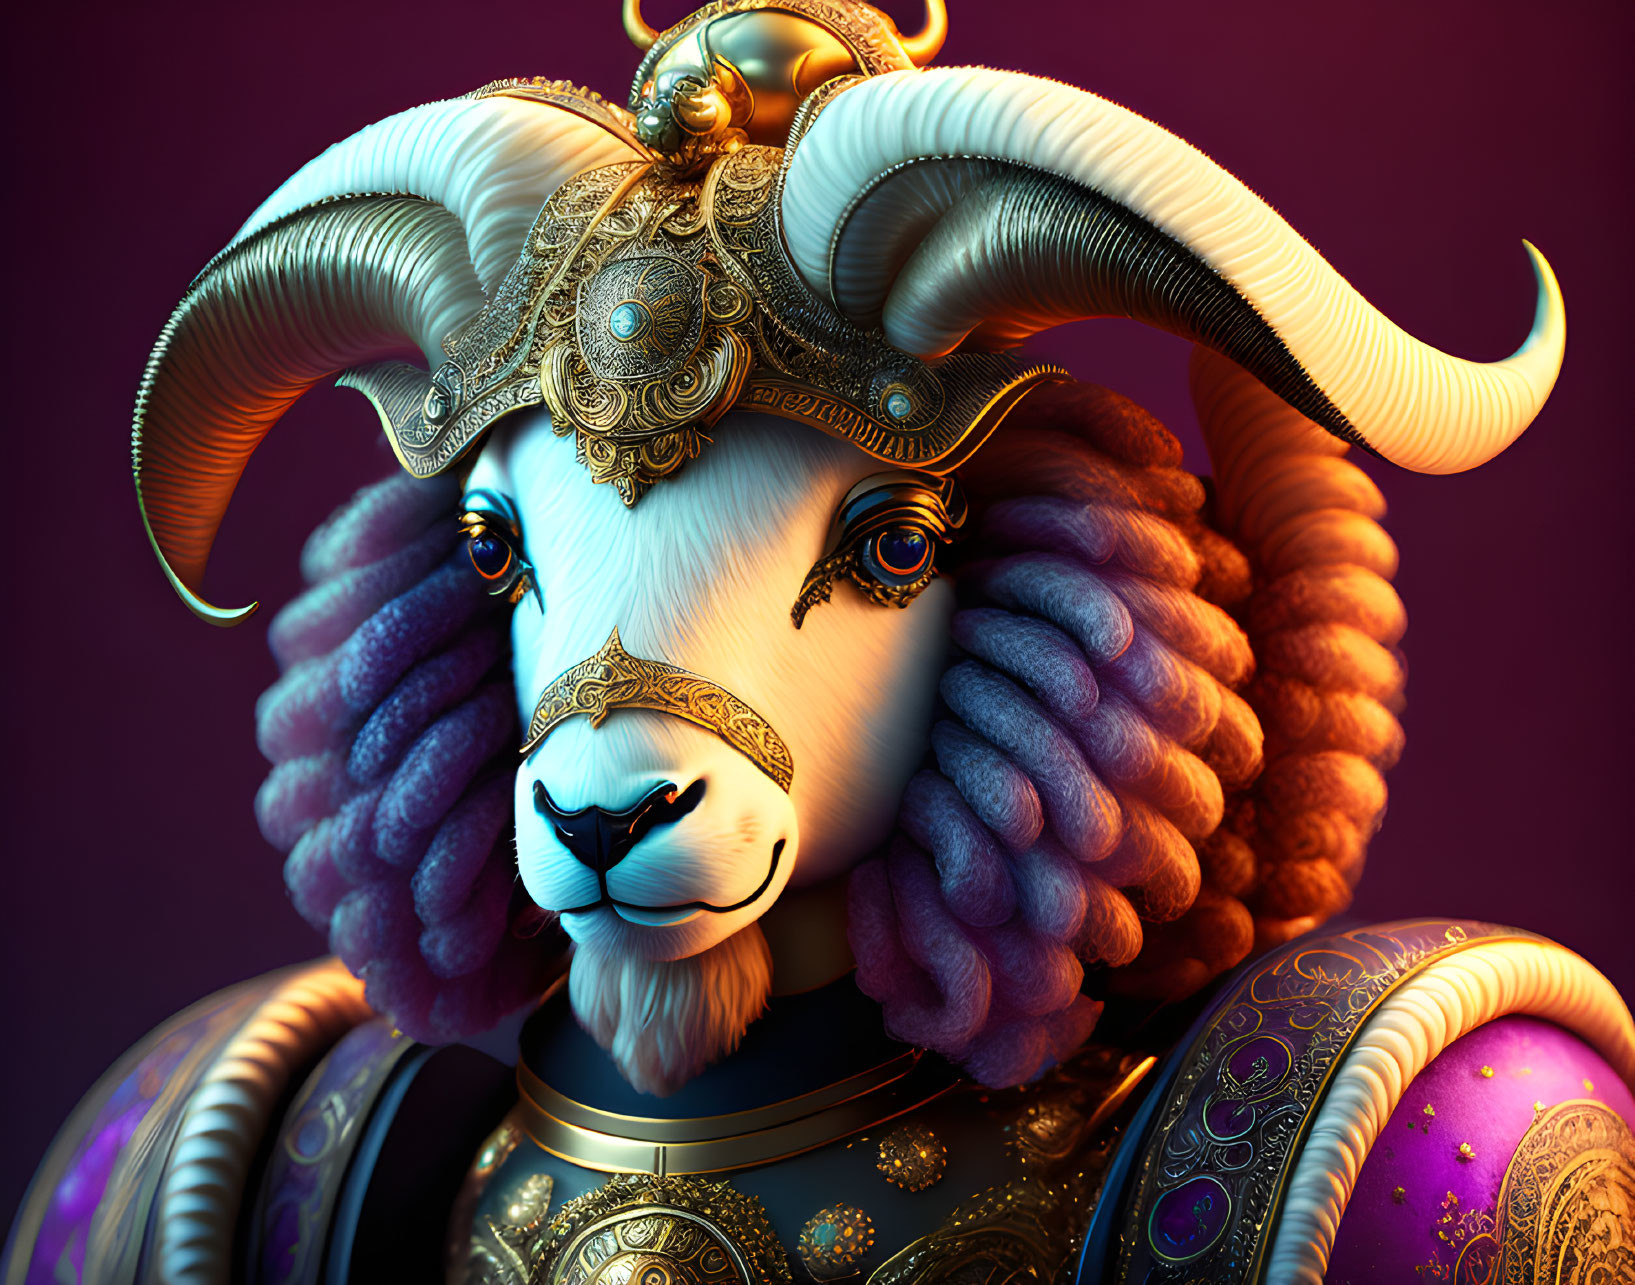 Golden-embellished armored ram with curly fleece on purple background